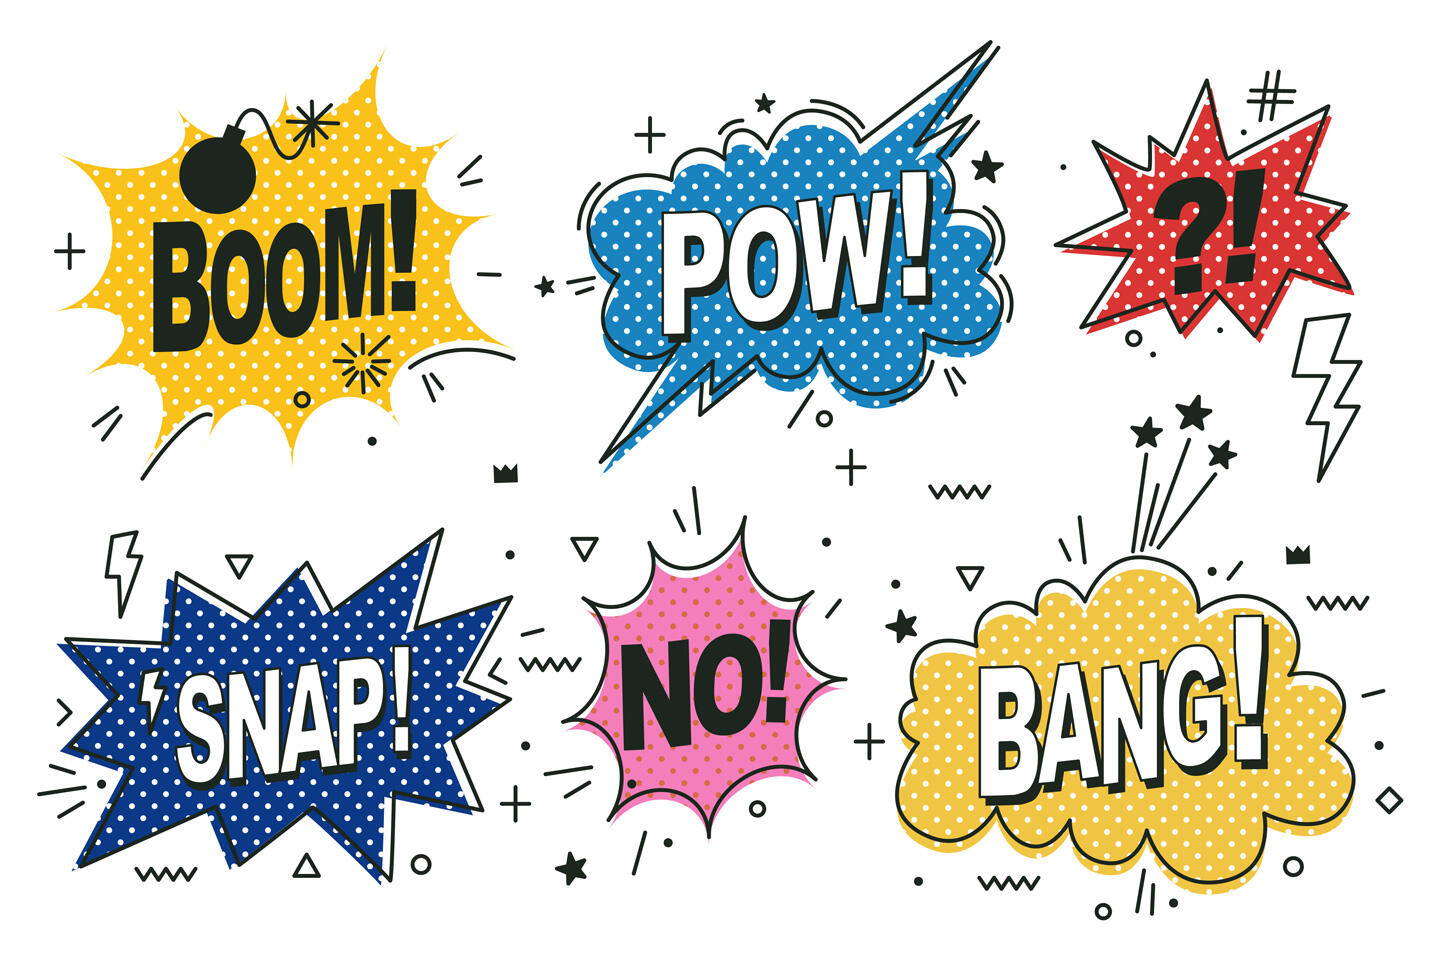 Various comic-style speech bubbles with words like "BOOM!", "POW!", "SNAP!", "NO!", and "BANG!" in vivid colors and patterns of dots, stars, and lightning, conveying the energy and vibrancy of comic books.